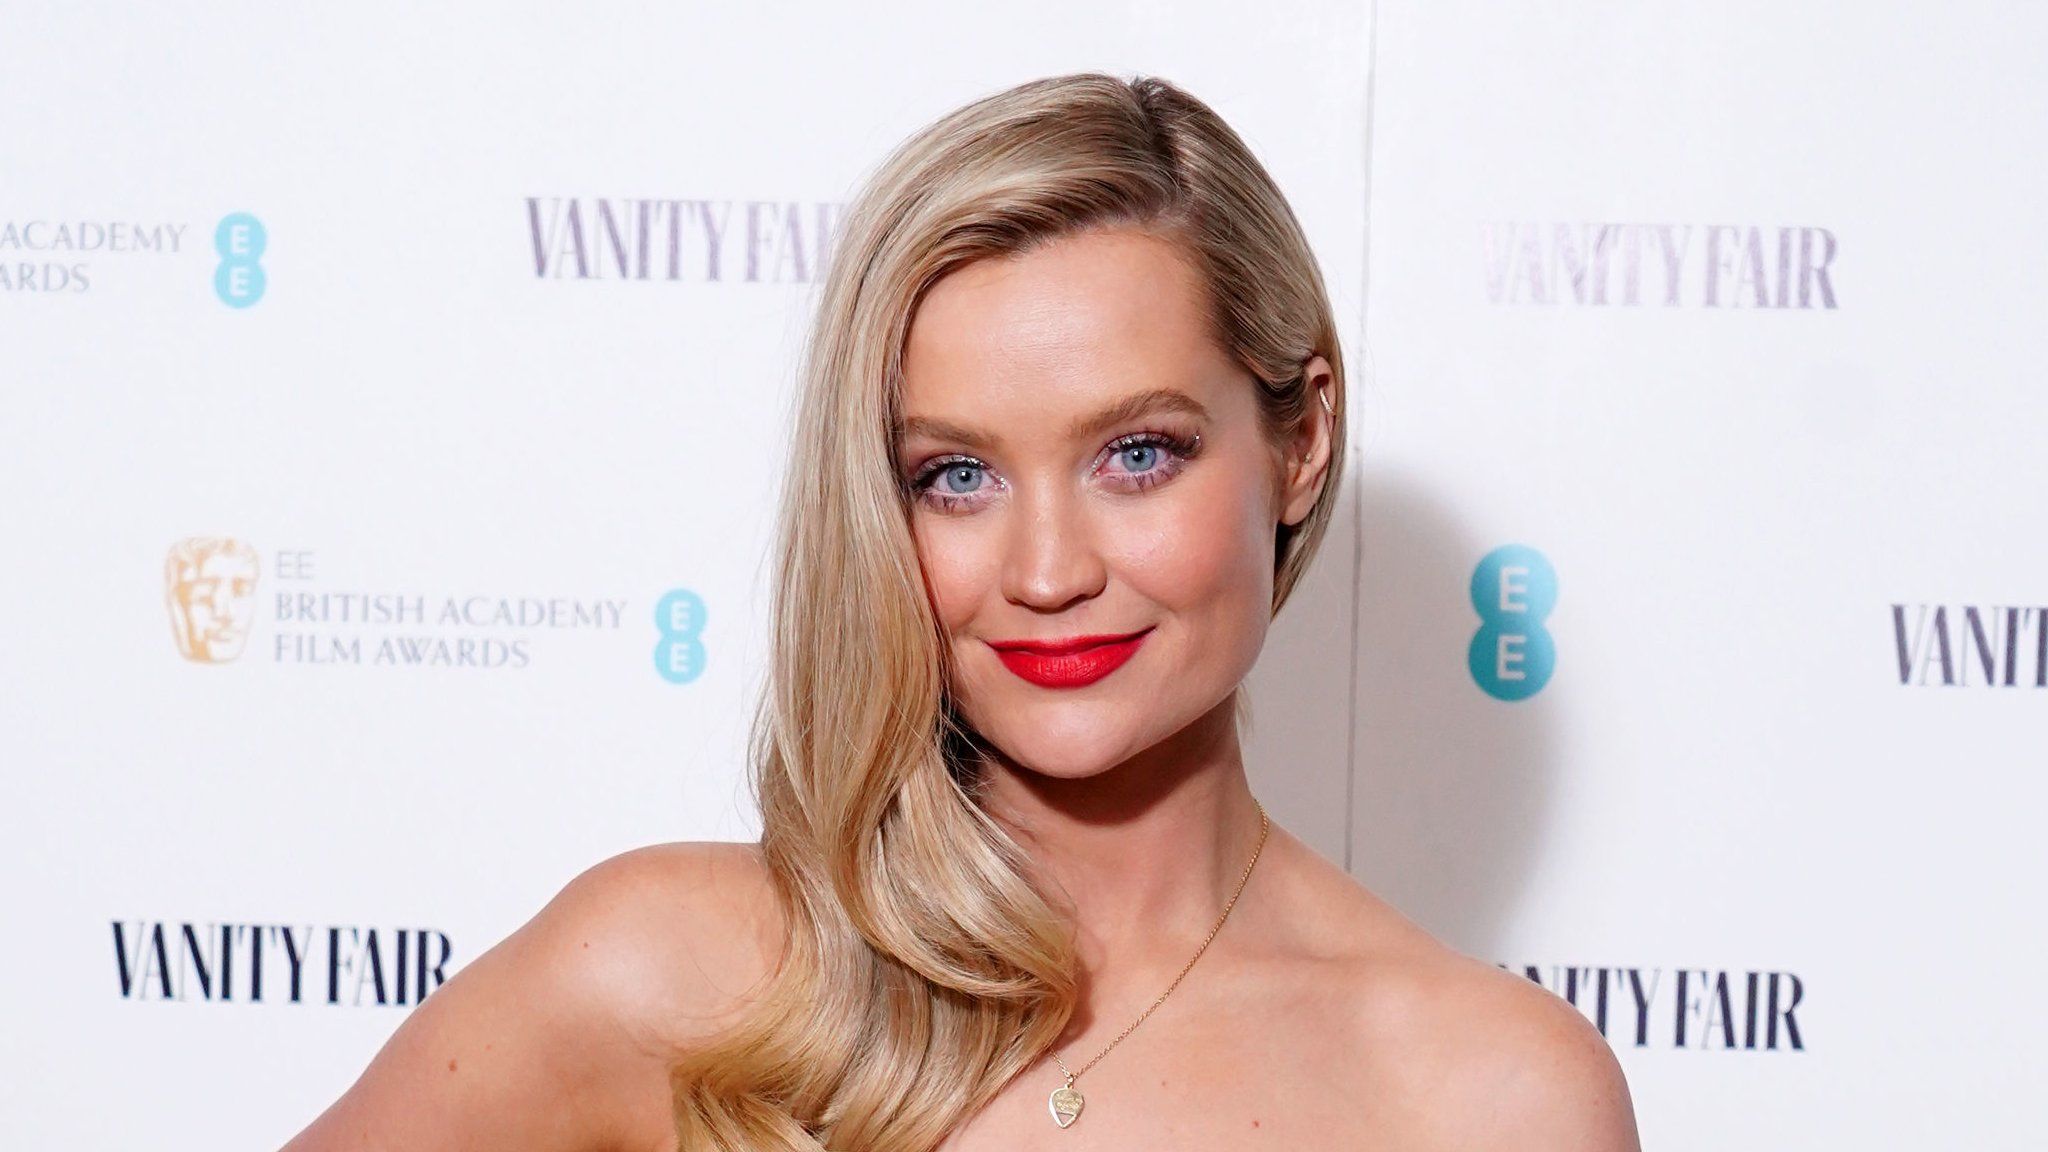 Laura Whitmore is leaving the hit ITV2 show